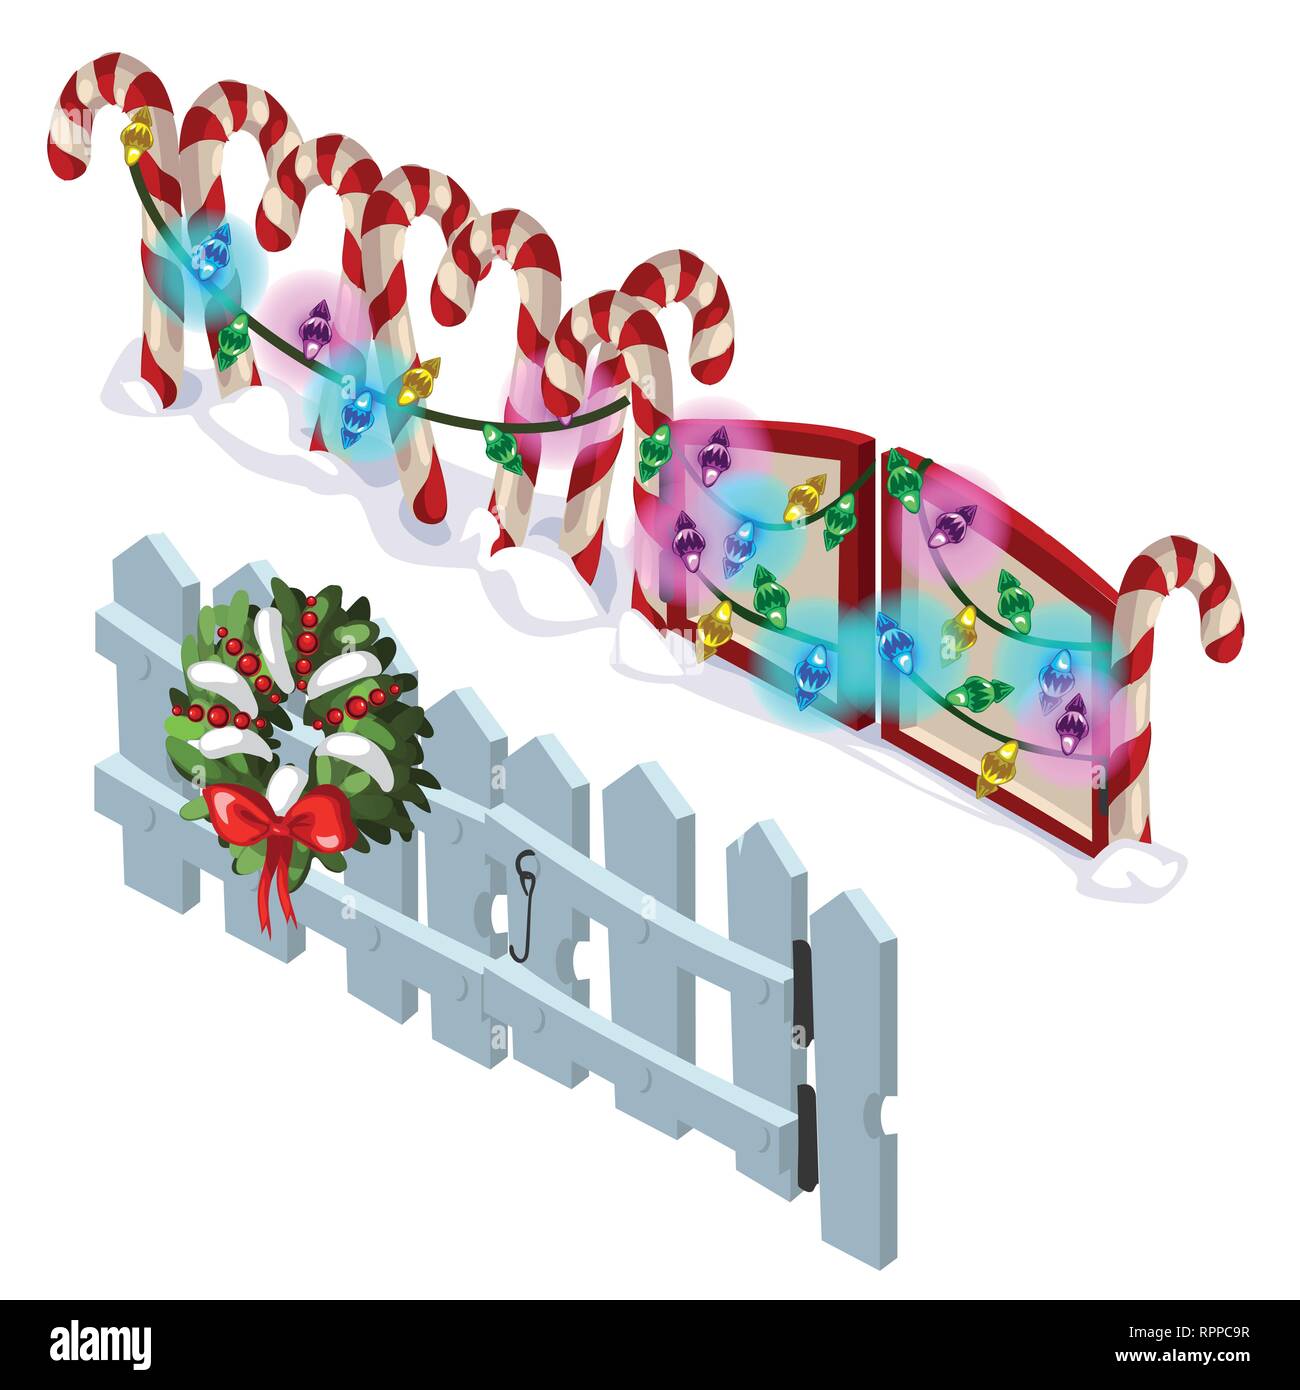 Element of wooden fence and candy cane with Christmas decorations isolated on white background. Vector cartoon close-up illustration. Stock Vector